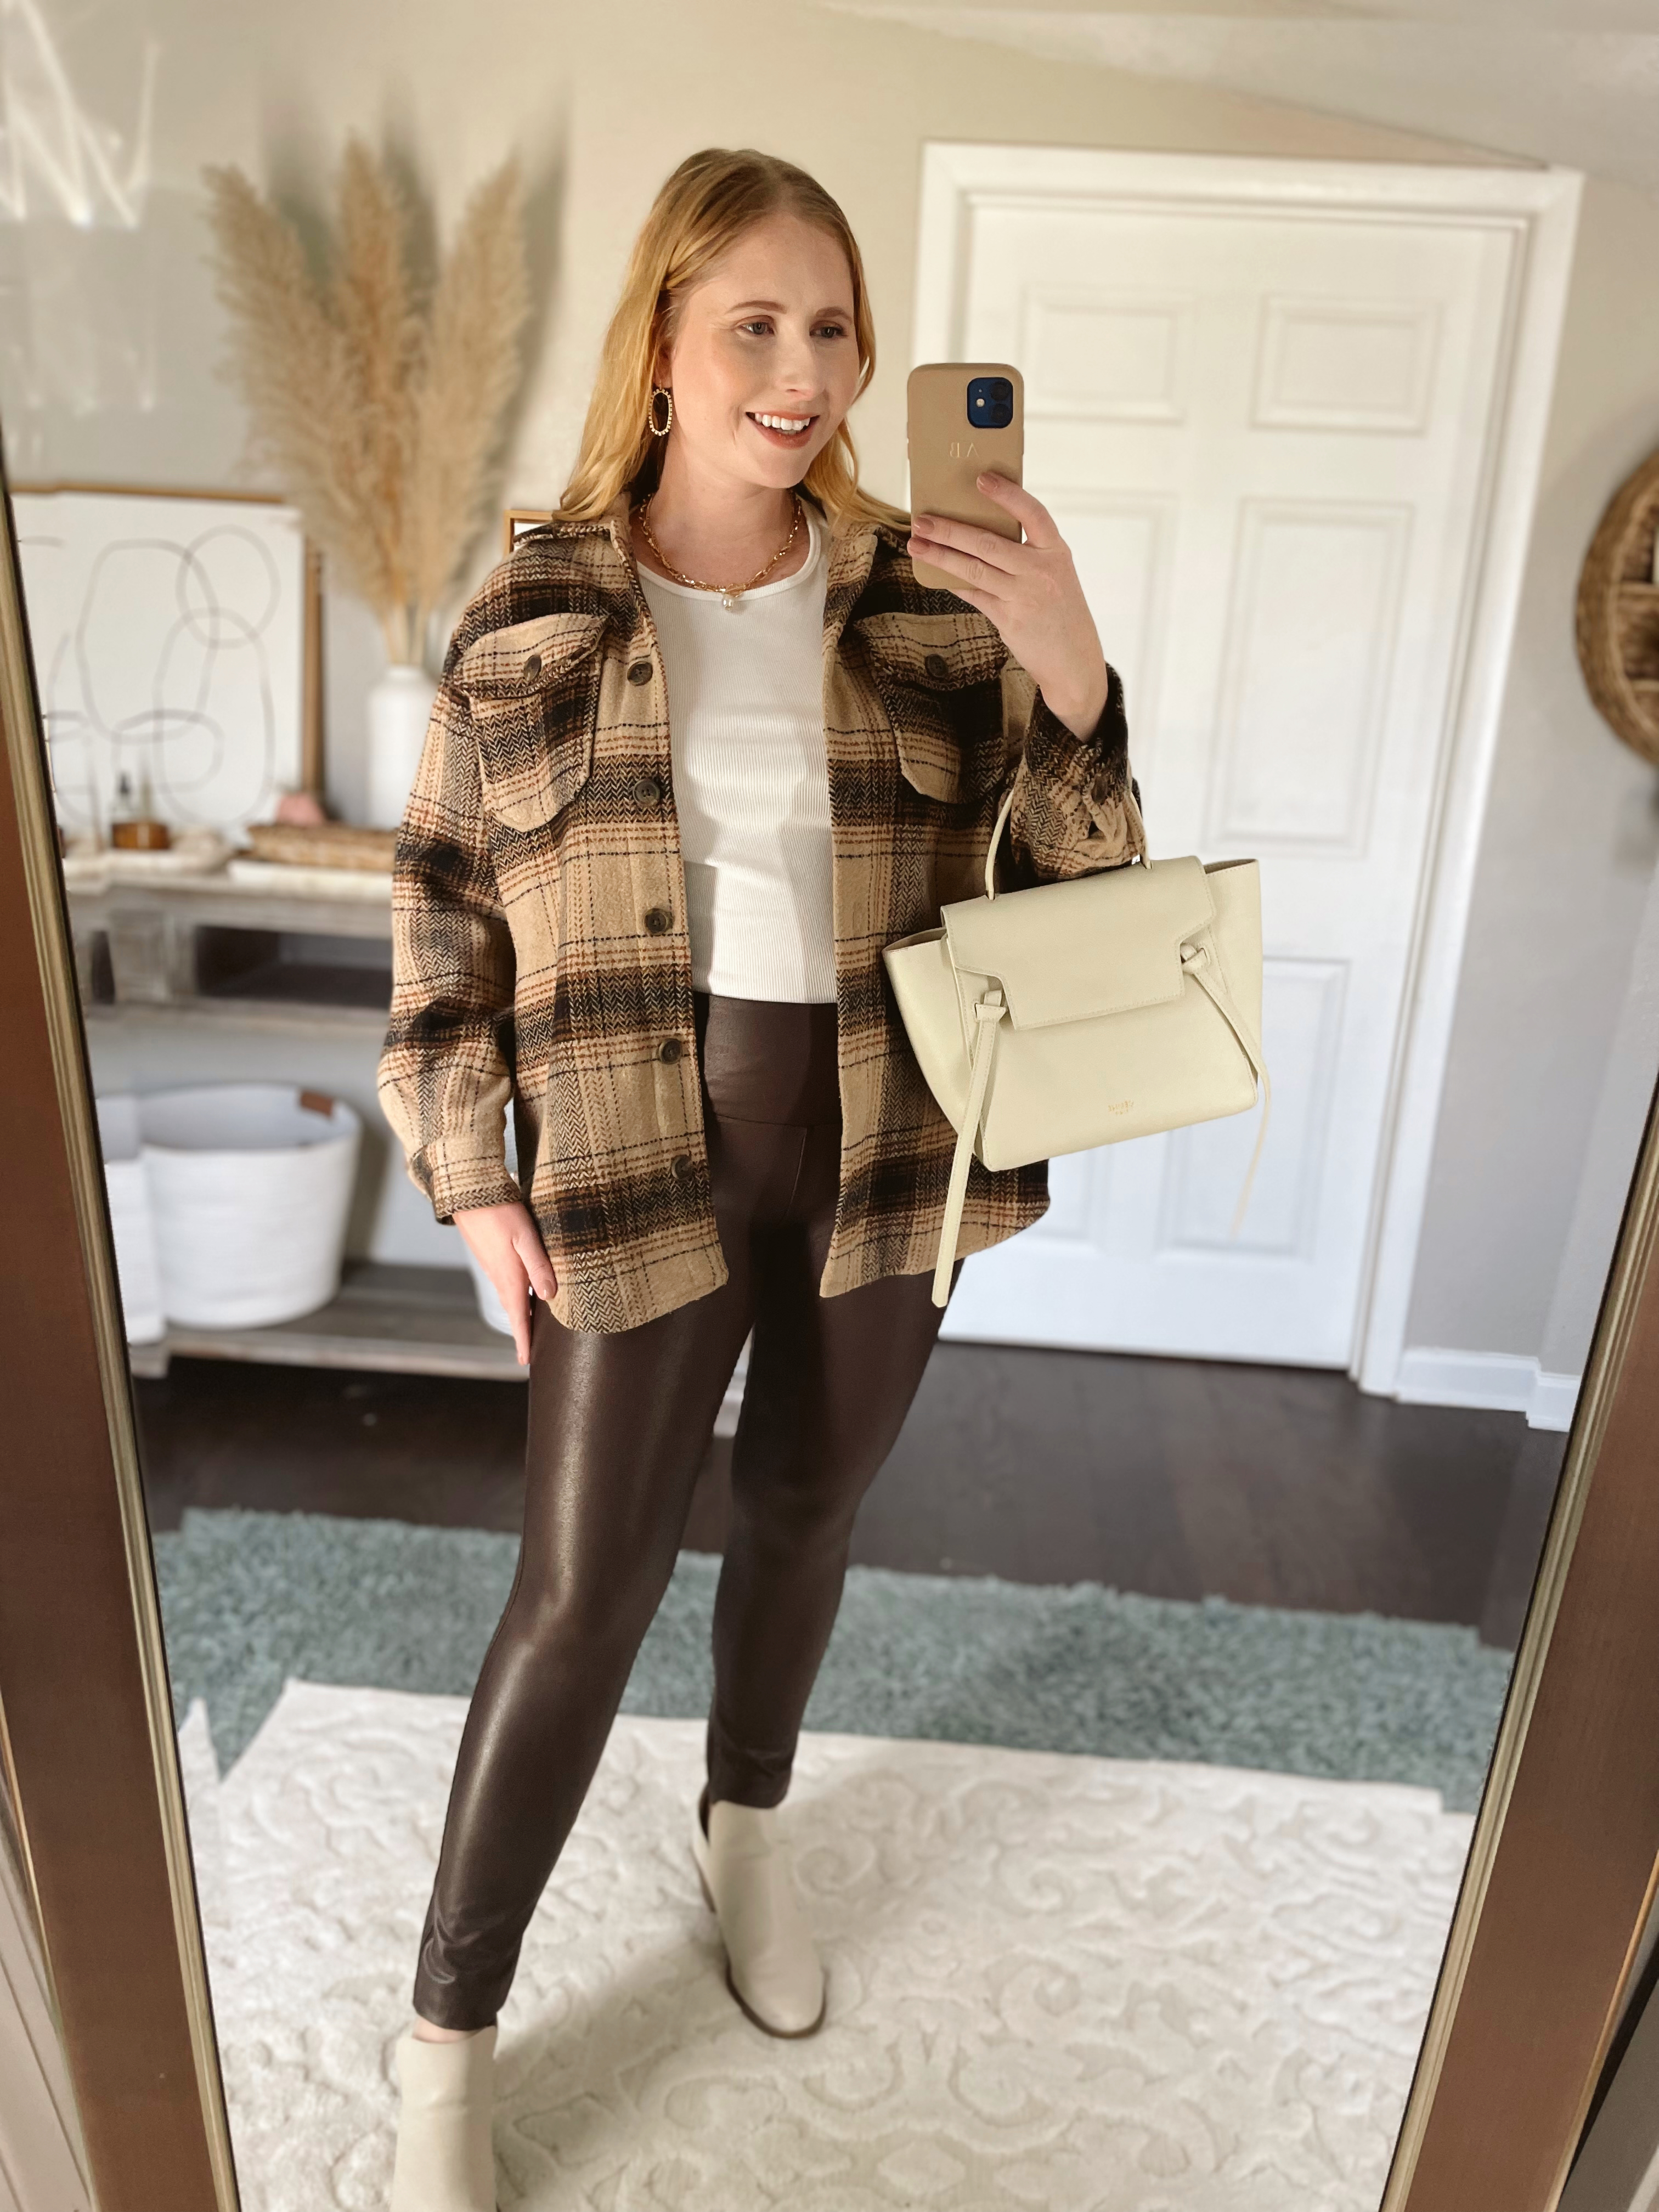 MAGIC PANTS - Fall outfit with fake leather pants